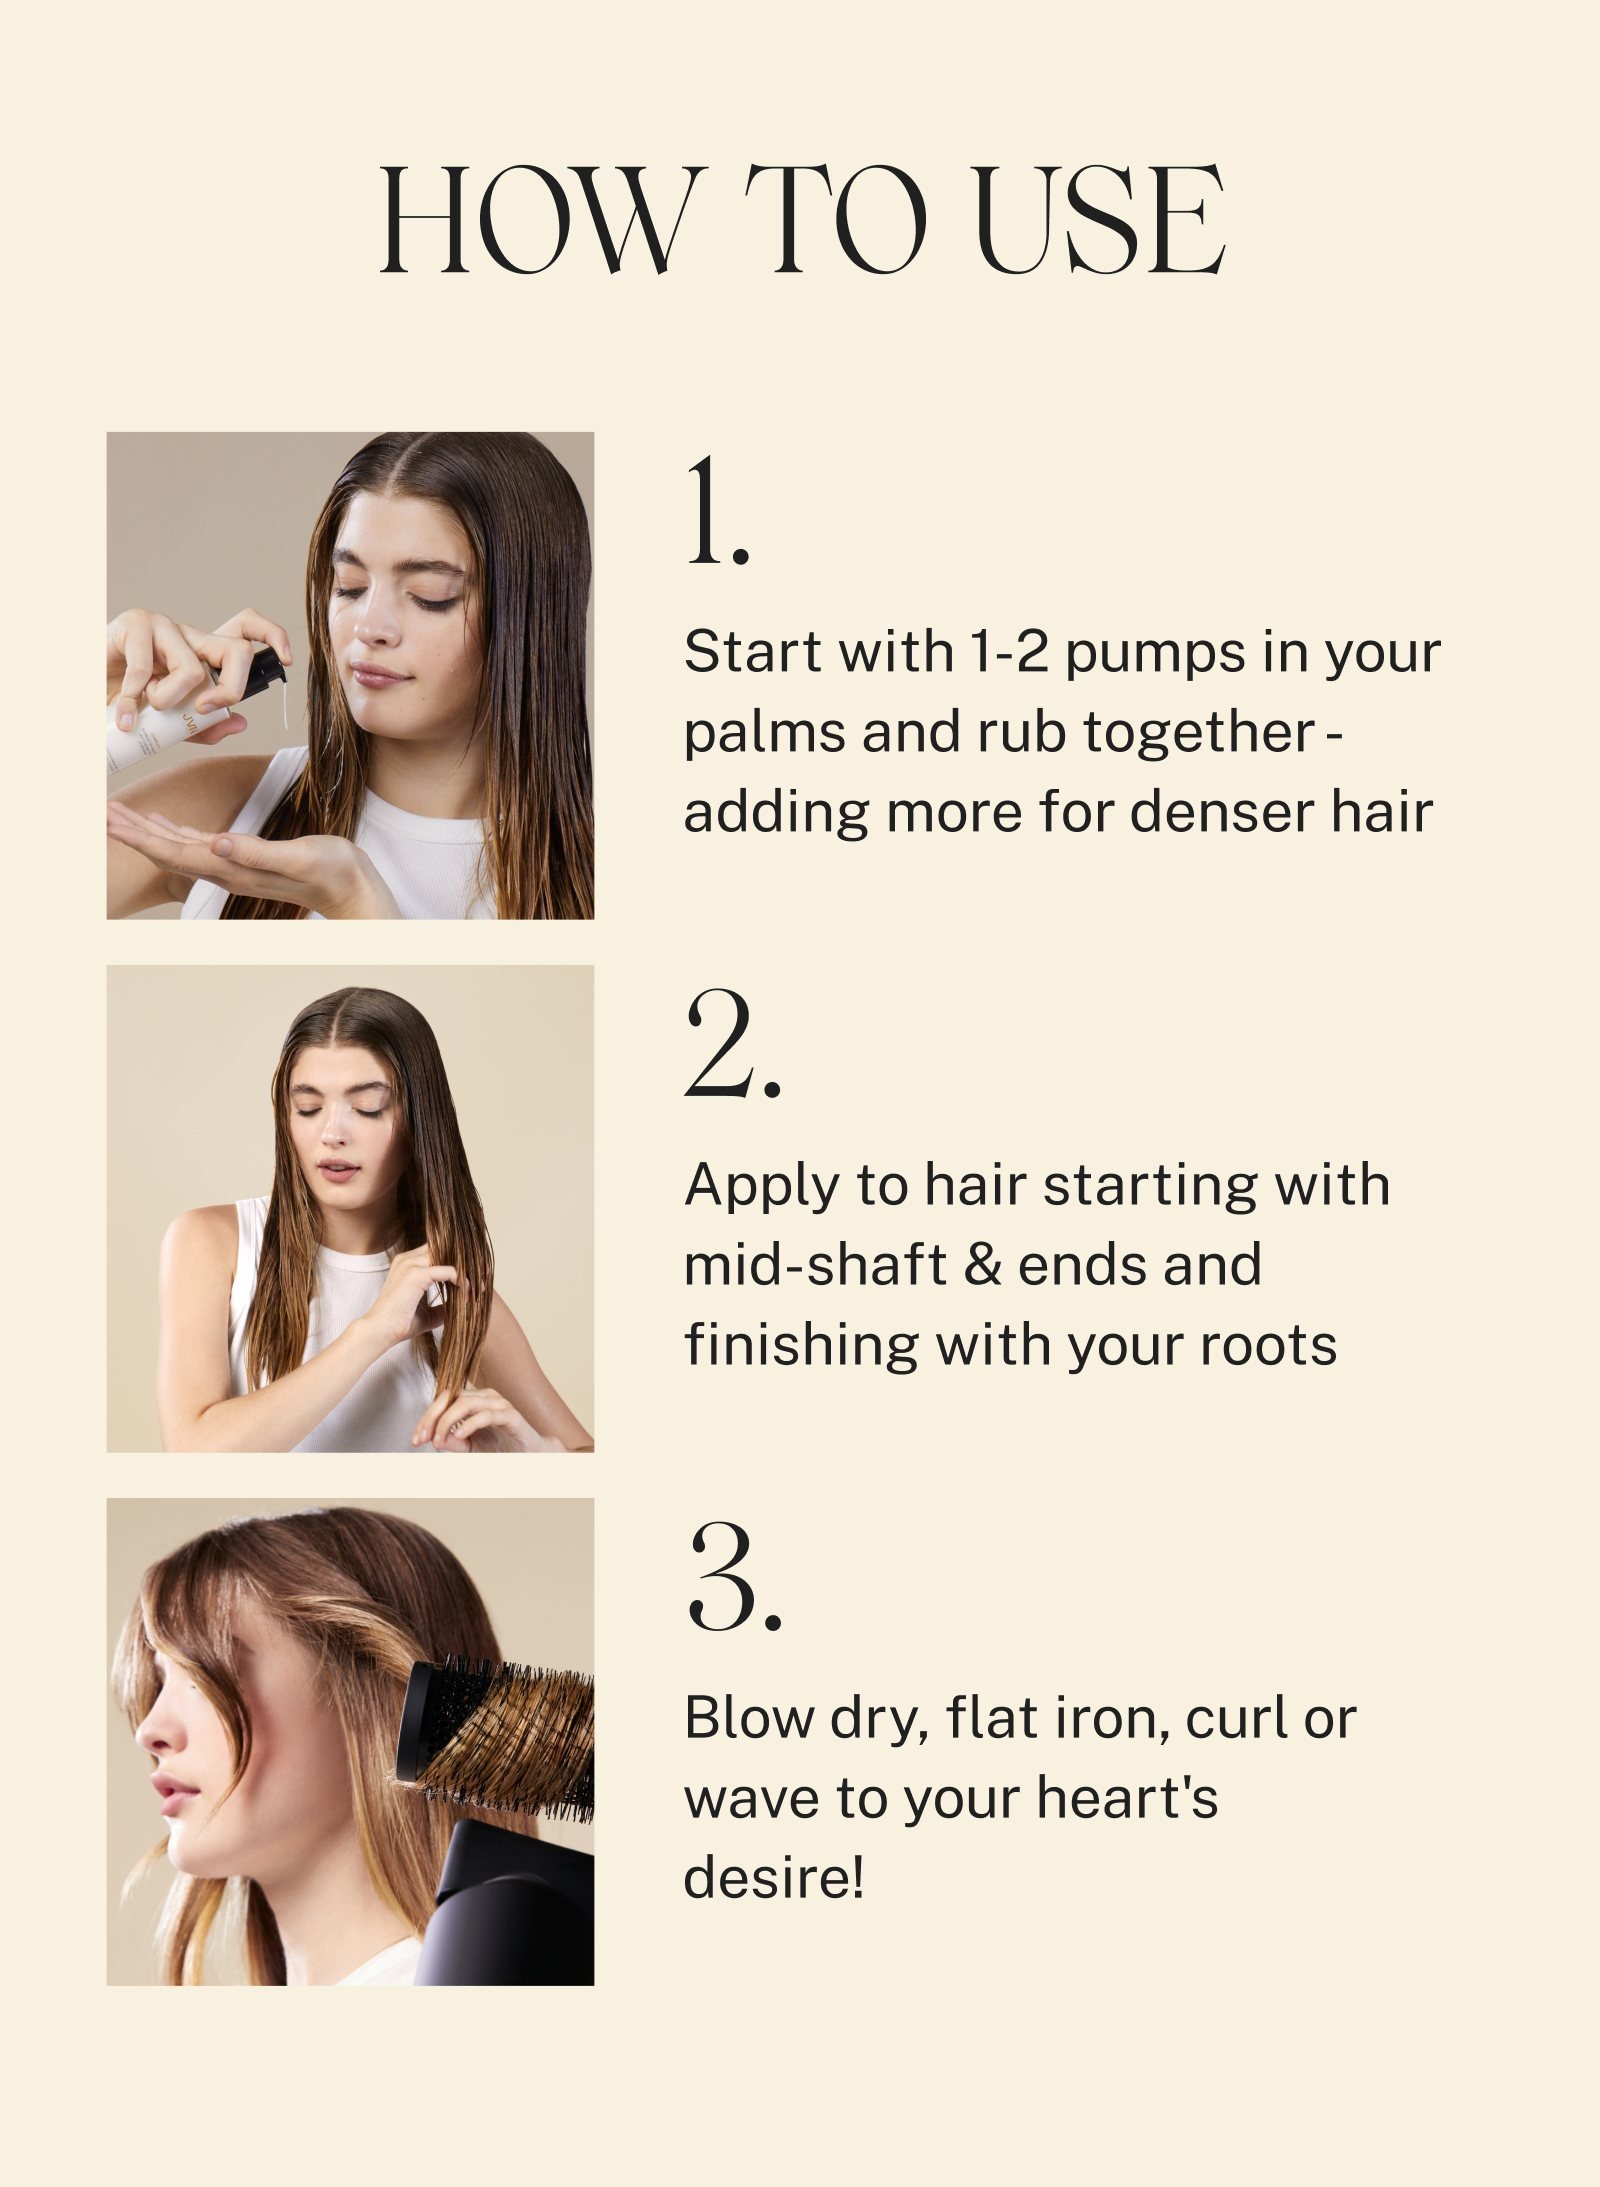 How to Use: 1. Start with 1-2 pumps in your palms and rub together adding more for denser hair. 2. Apply to hair starting with mid-shaft and ends and finishing with your roots. 3. Blow Dry, flat iron, curl or wave to your heart's desire.